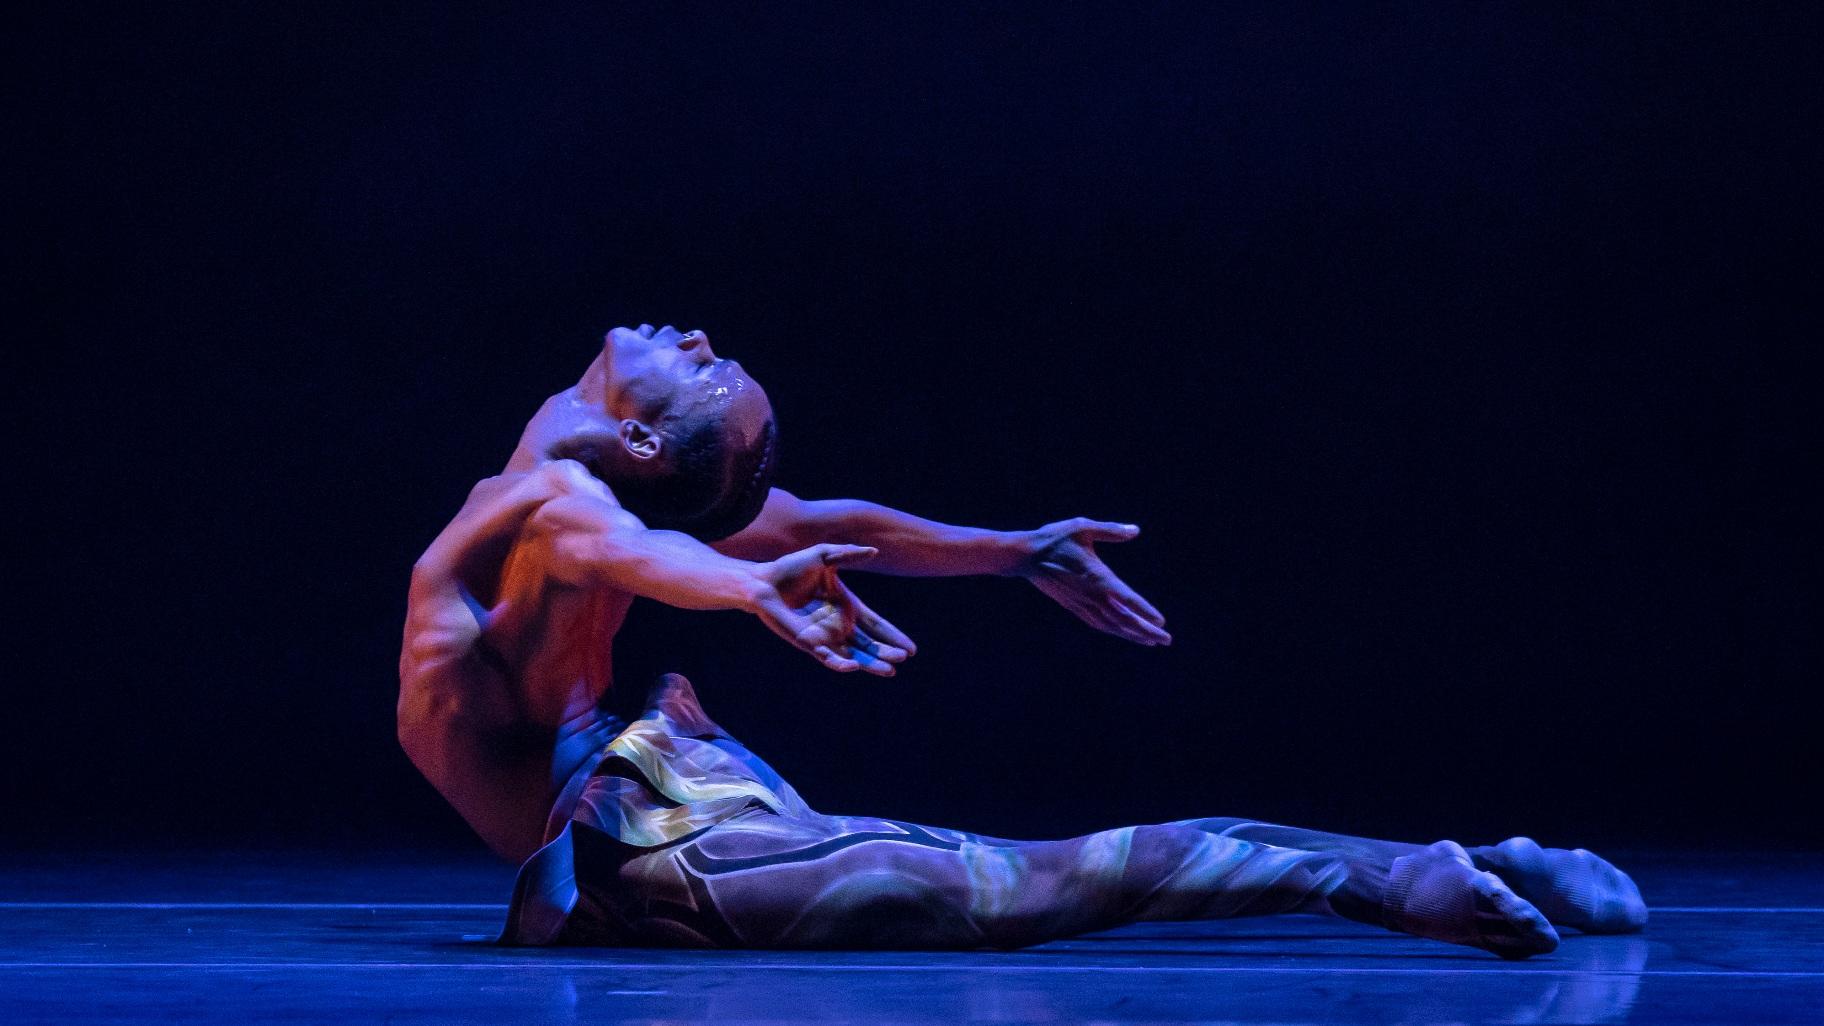 Ahmad Hill dances in “Aisatnaf” from Deeply Rooted Dance Theater. (Credit: Todd Rosenberg)